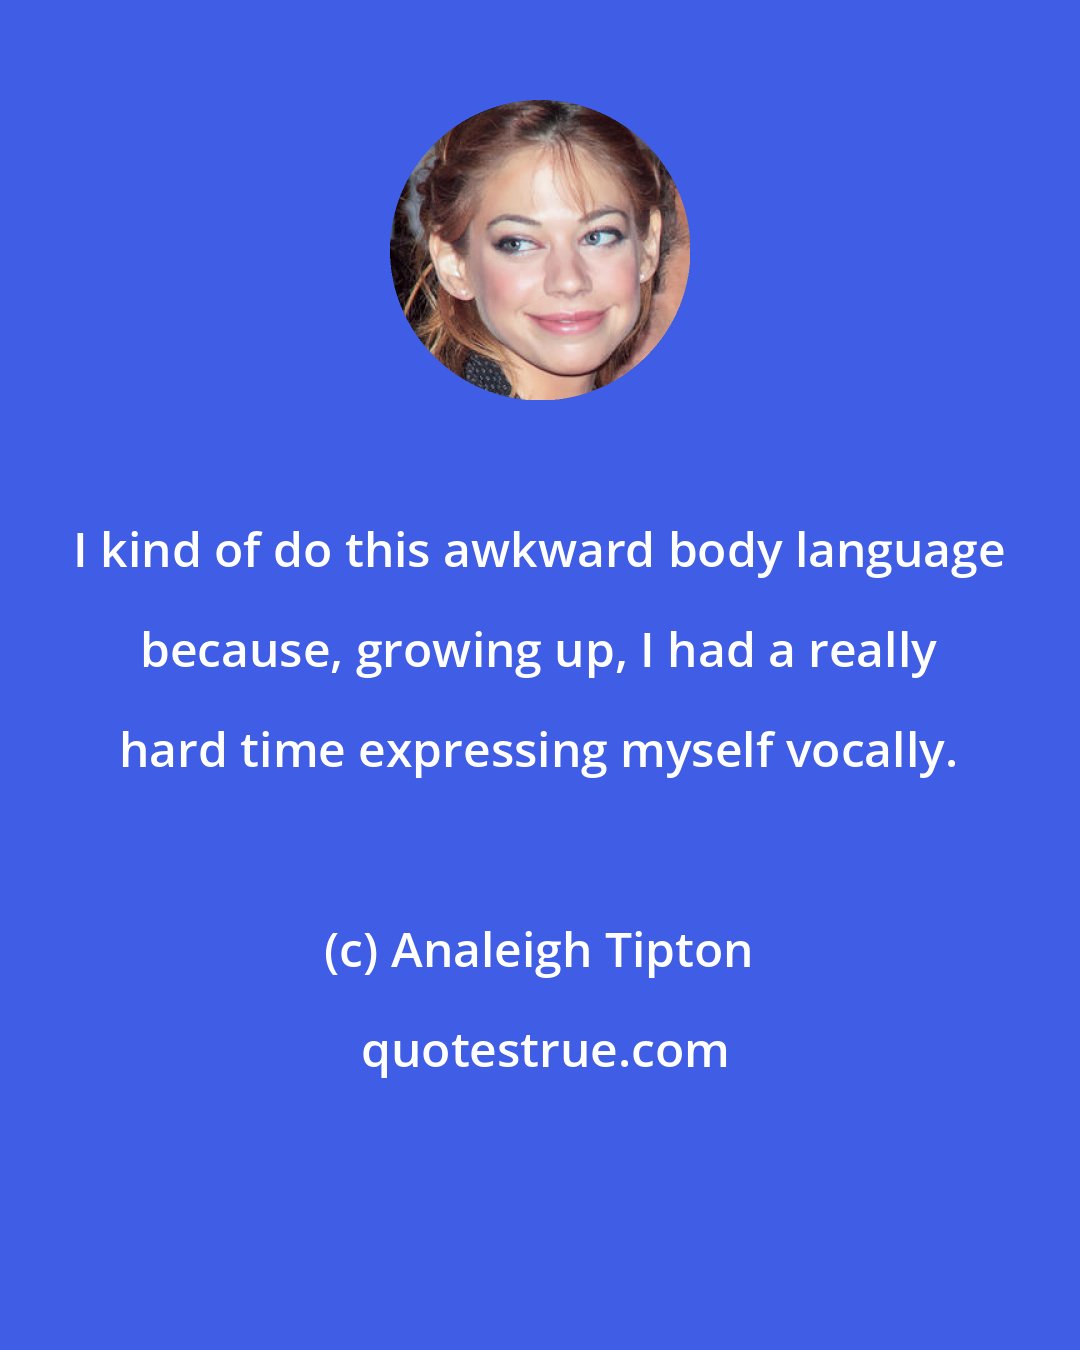 Analeigh Tipton: I kind of do this awkward body language because, growing up, I had a really hard time expressing myself vocally.